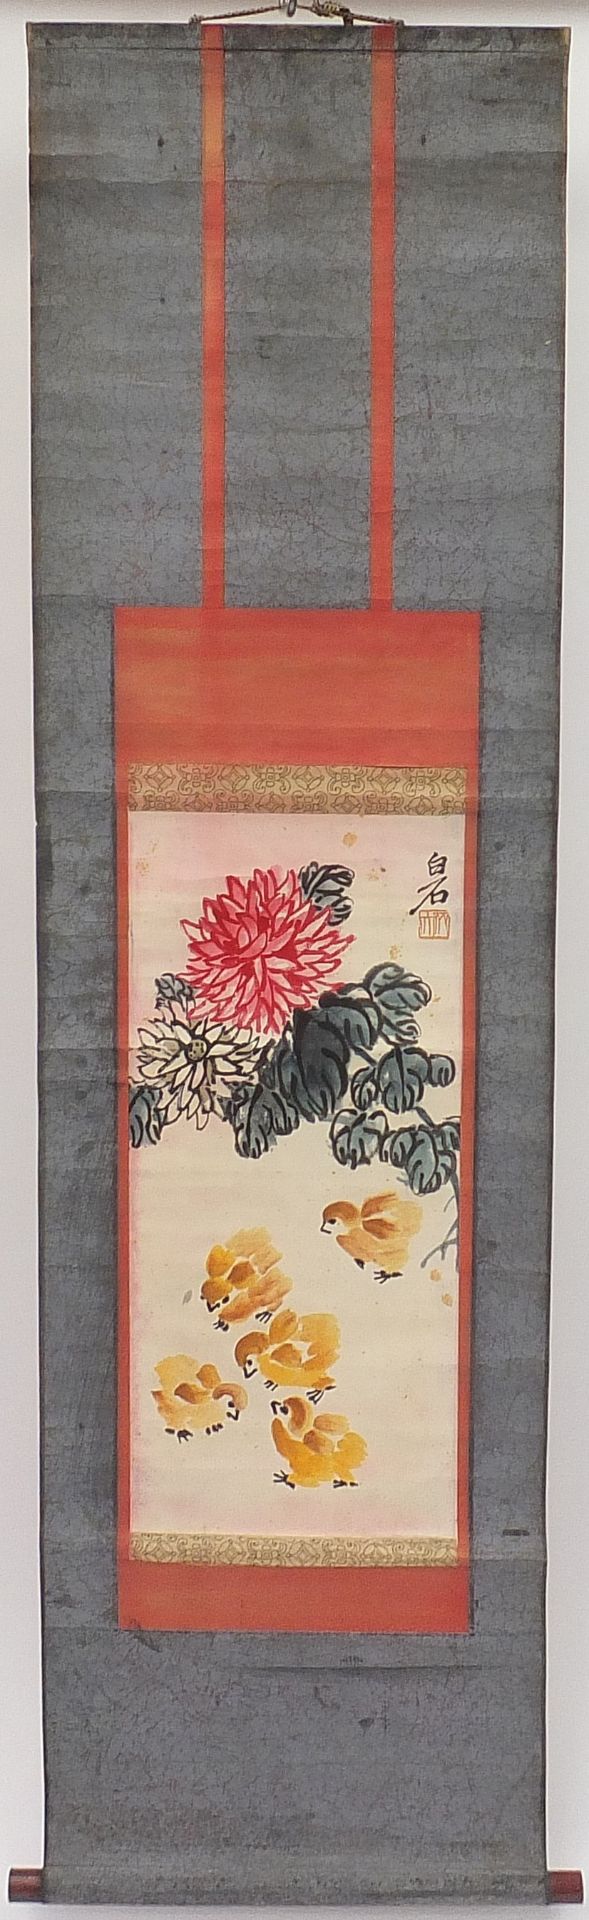 Attributed to Qi Baishi - Chrysanthemums and chicks, Chinese ink and watercolour walll hanging - Image 3 of 5